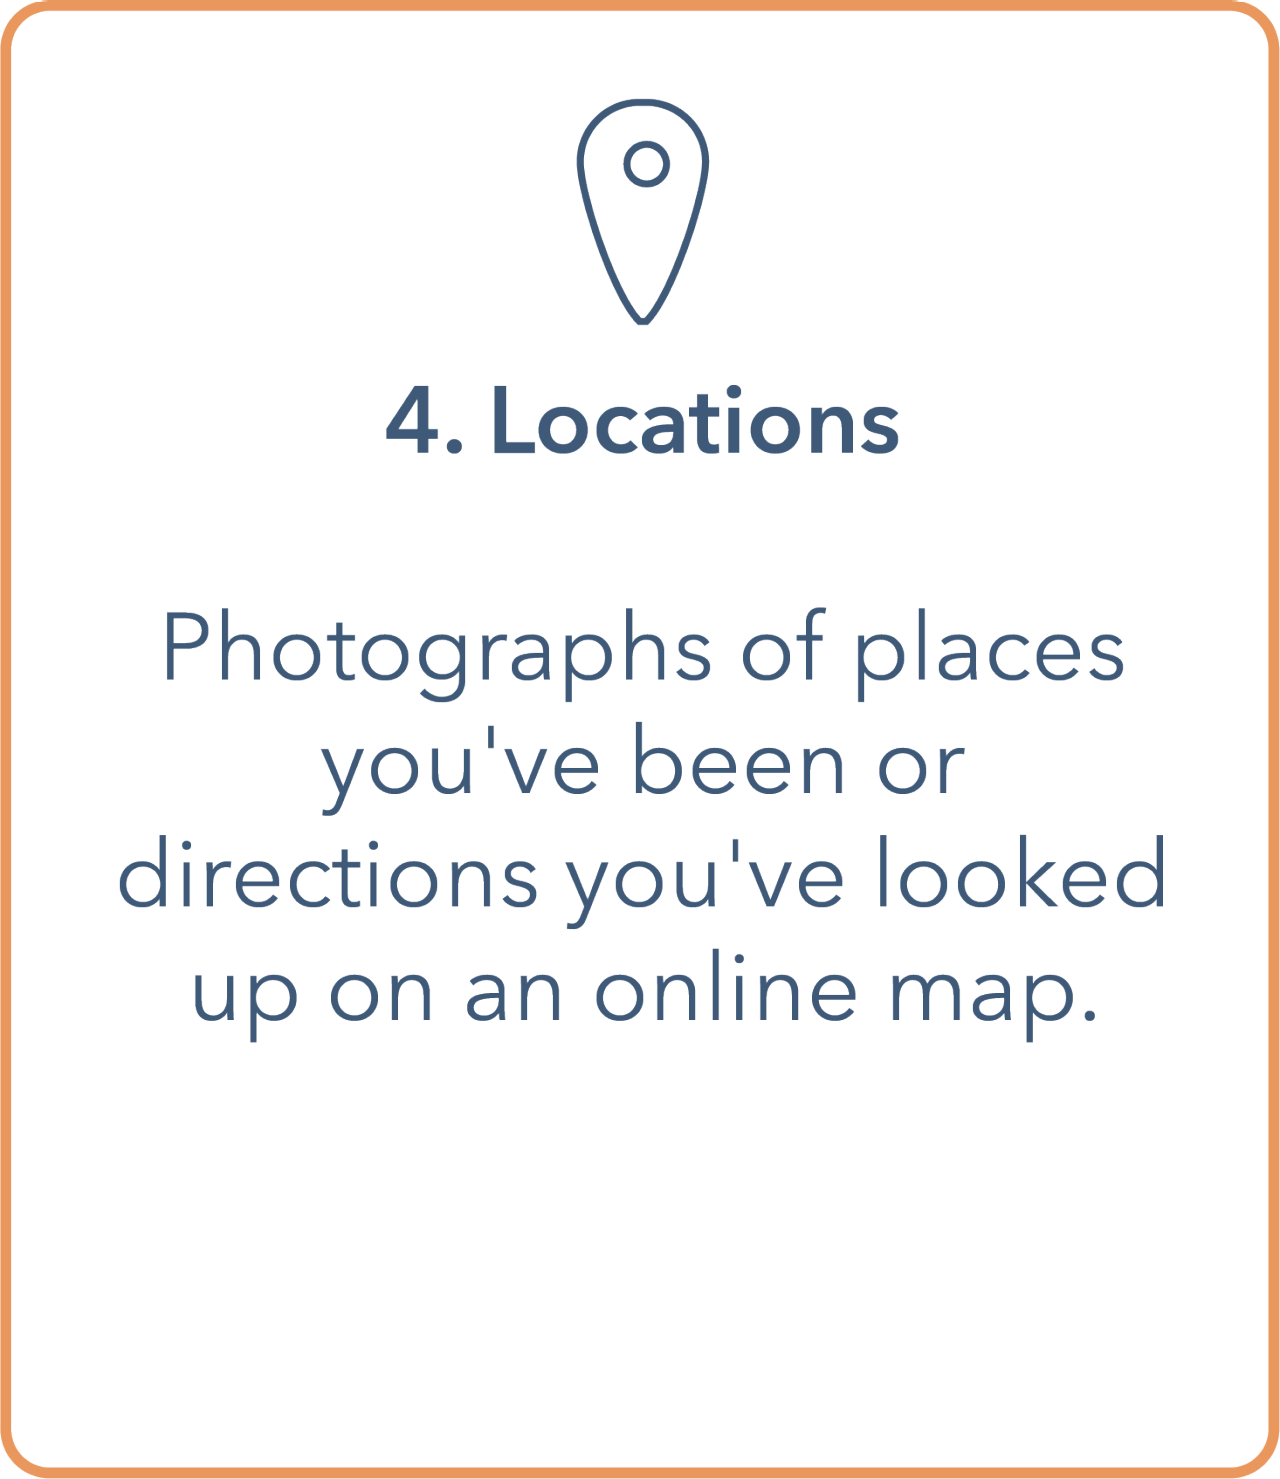 Image shows a tile with a an outline of a pinpoint arrow pointing down at the top. Underneath is a bullet point containing '4. Locations'. The main body contains 'photographs of places you've been or directions you've looked up on an online map.' Tile has an orange outline border and text is in dark blue.